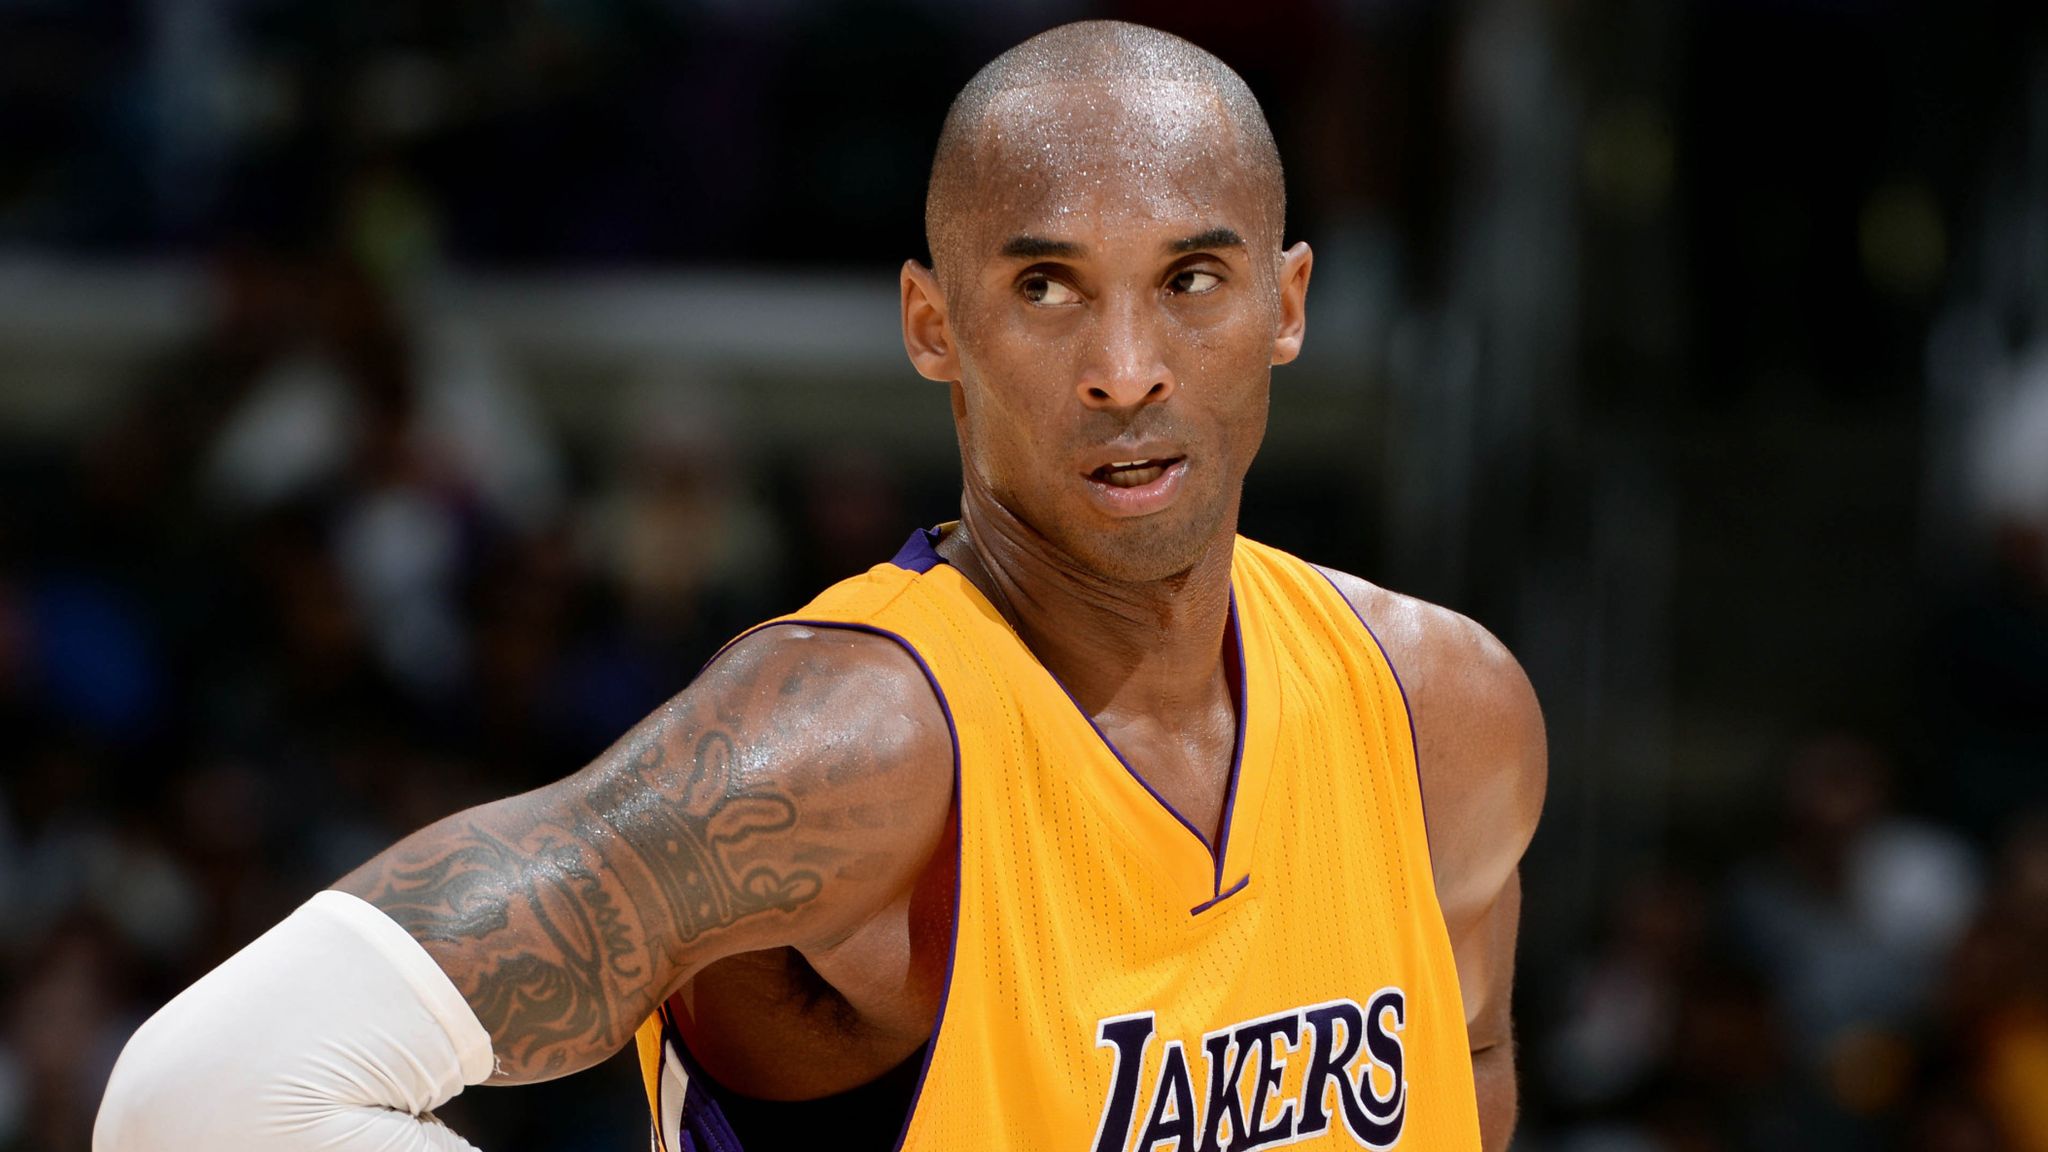 Kobe Bryant death leaves complicated legacy - The Mossy Log